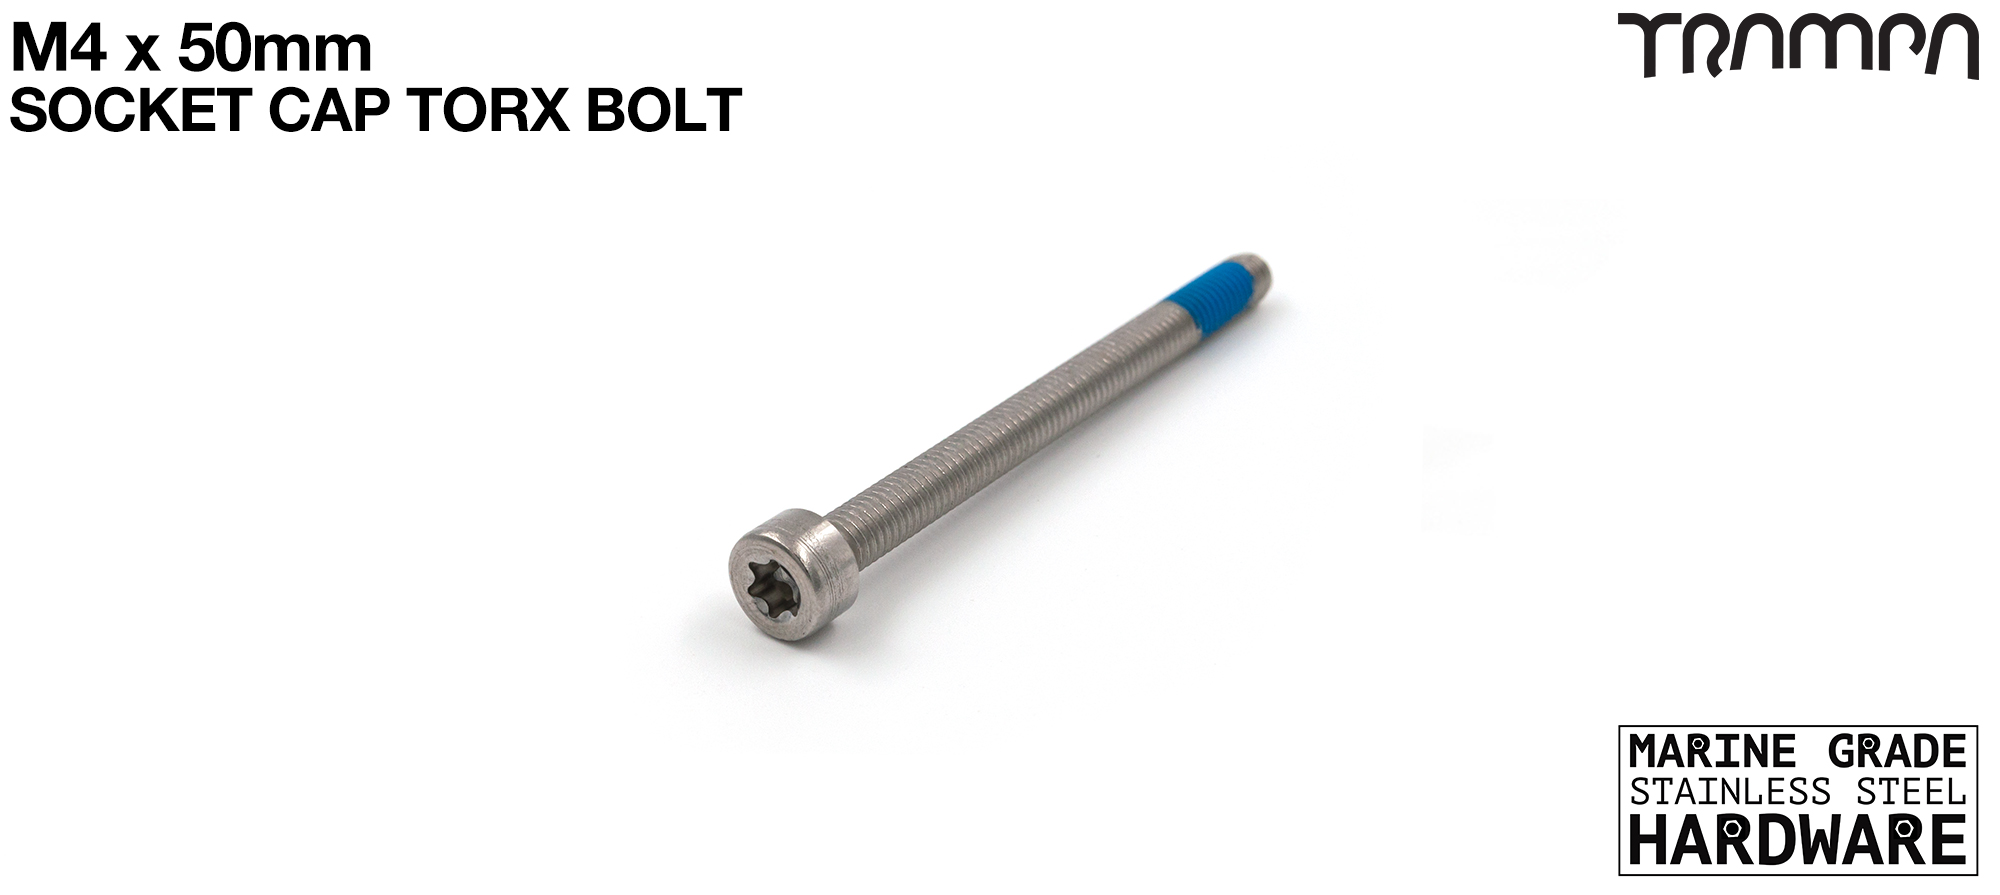 M4 x 50mm TORX Socket Capped Bolt - Marine Grade Stainless steel with locking paste 